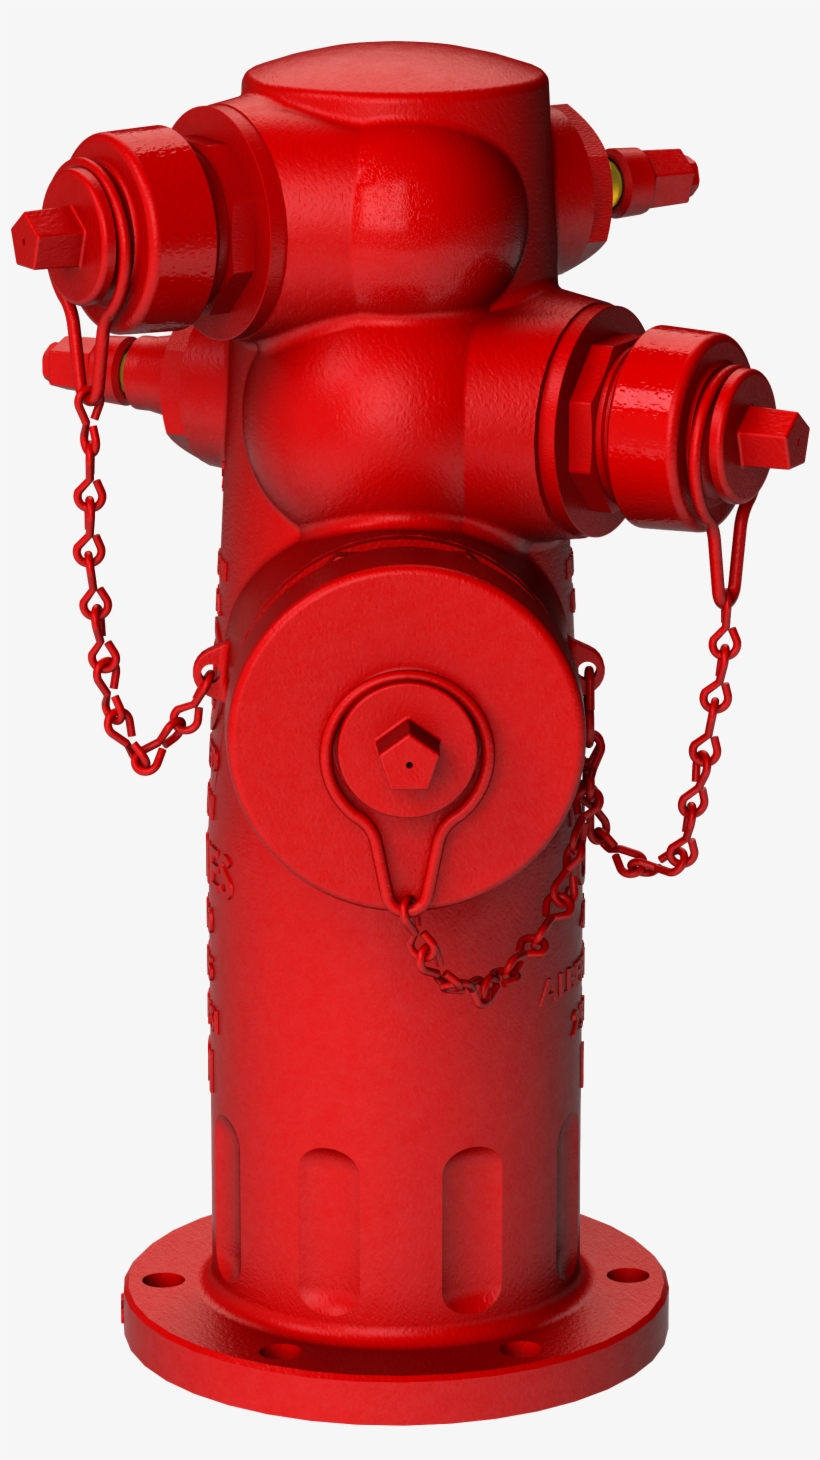 Fire Png Images Free Download - Jones Fire Hydrant, transparent png #181770